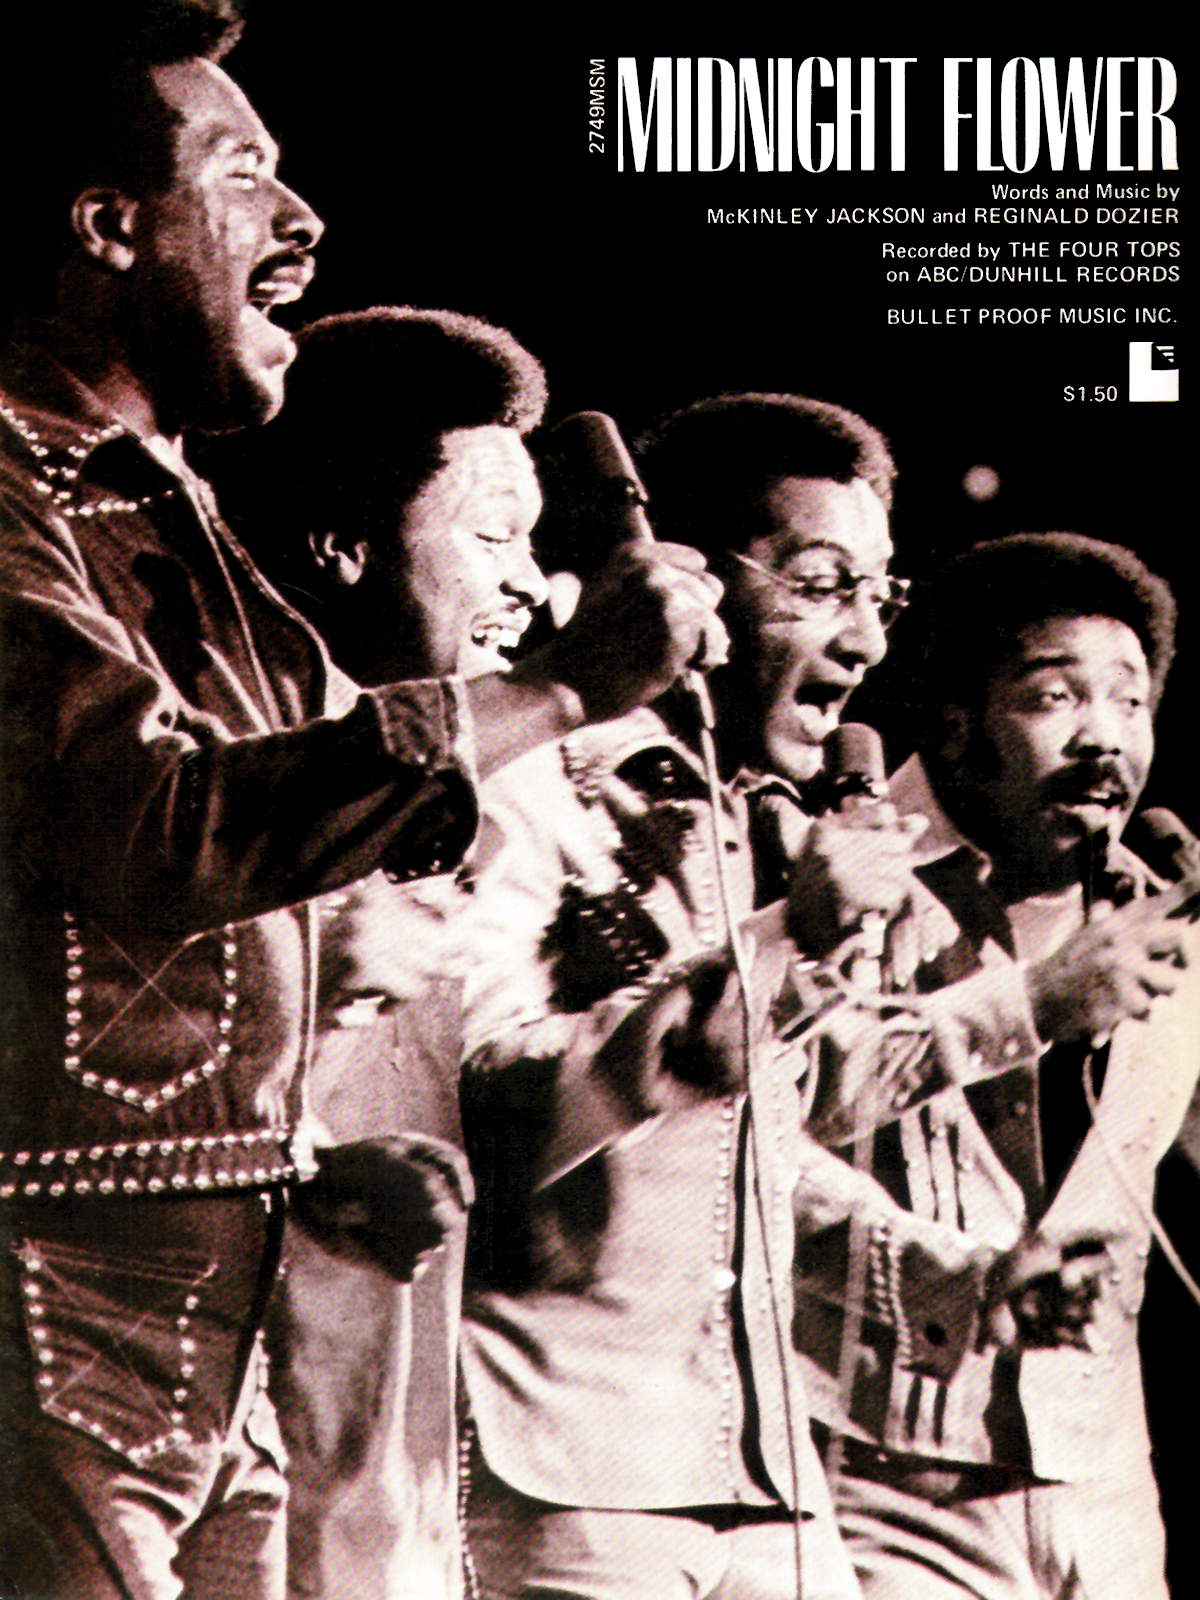 Hollow stege Krydret Stereo Candies: FOUR TOPS "MEETING OF THE MINDS" (1974)